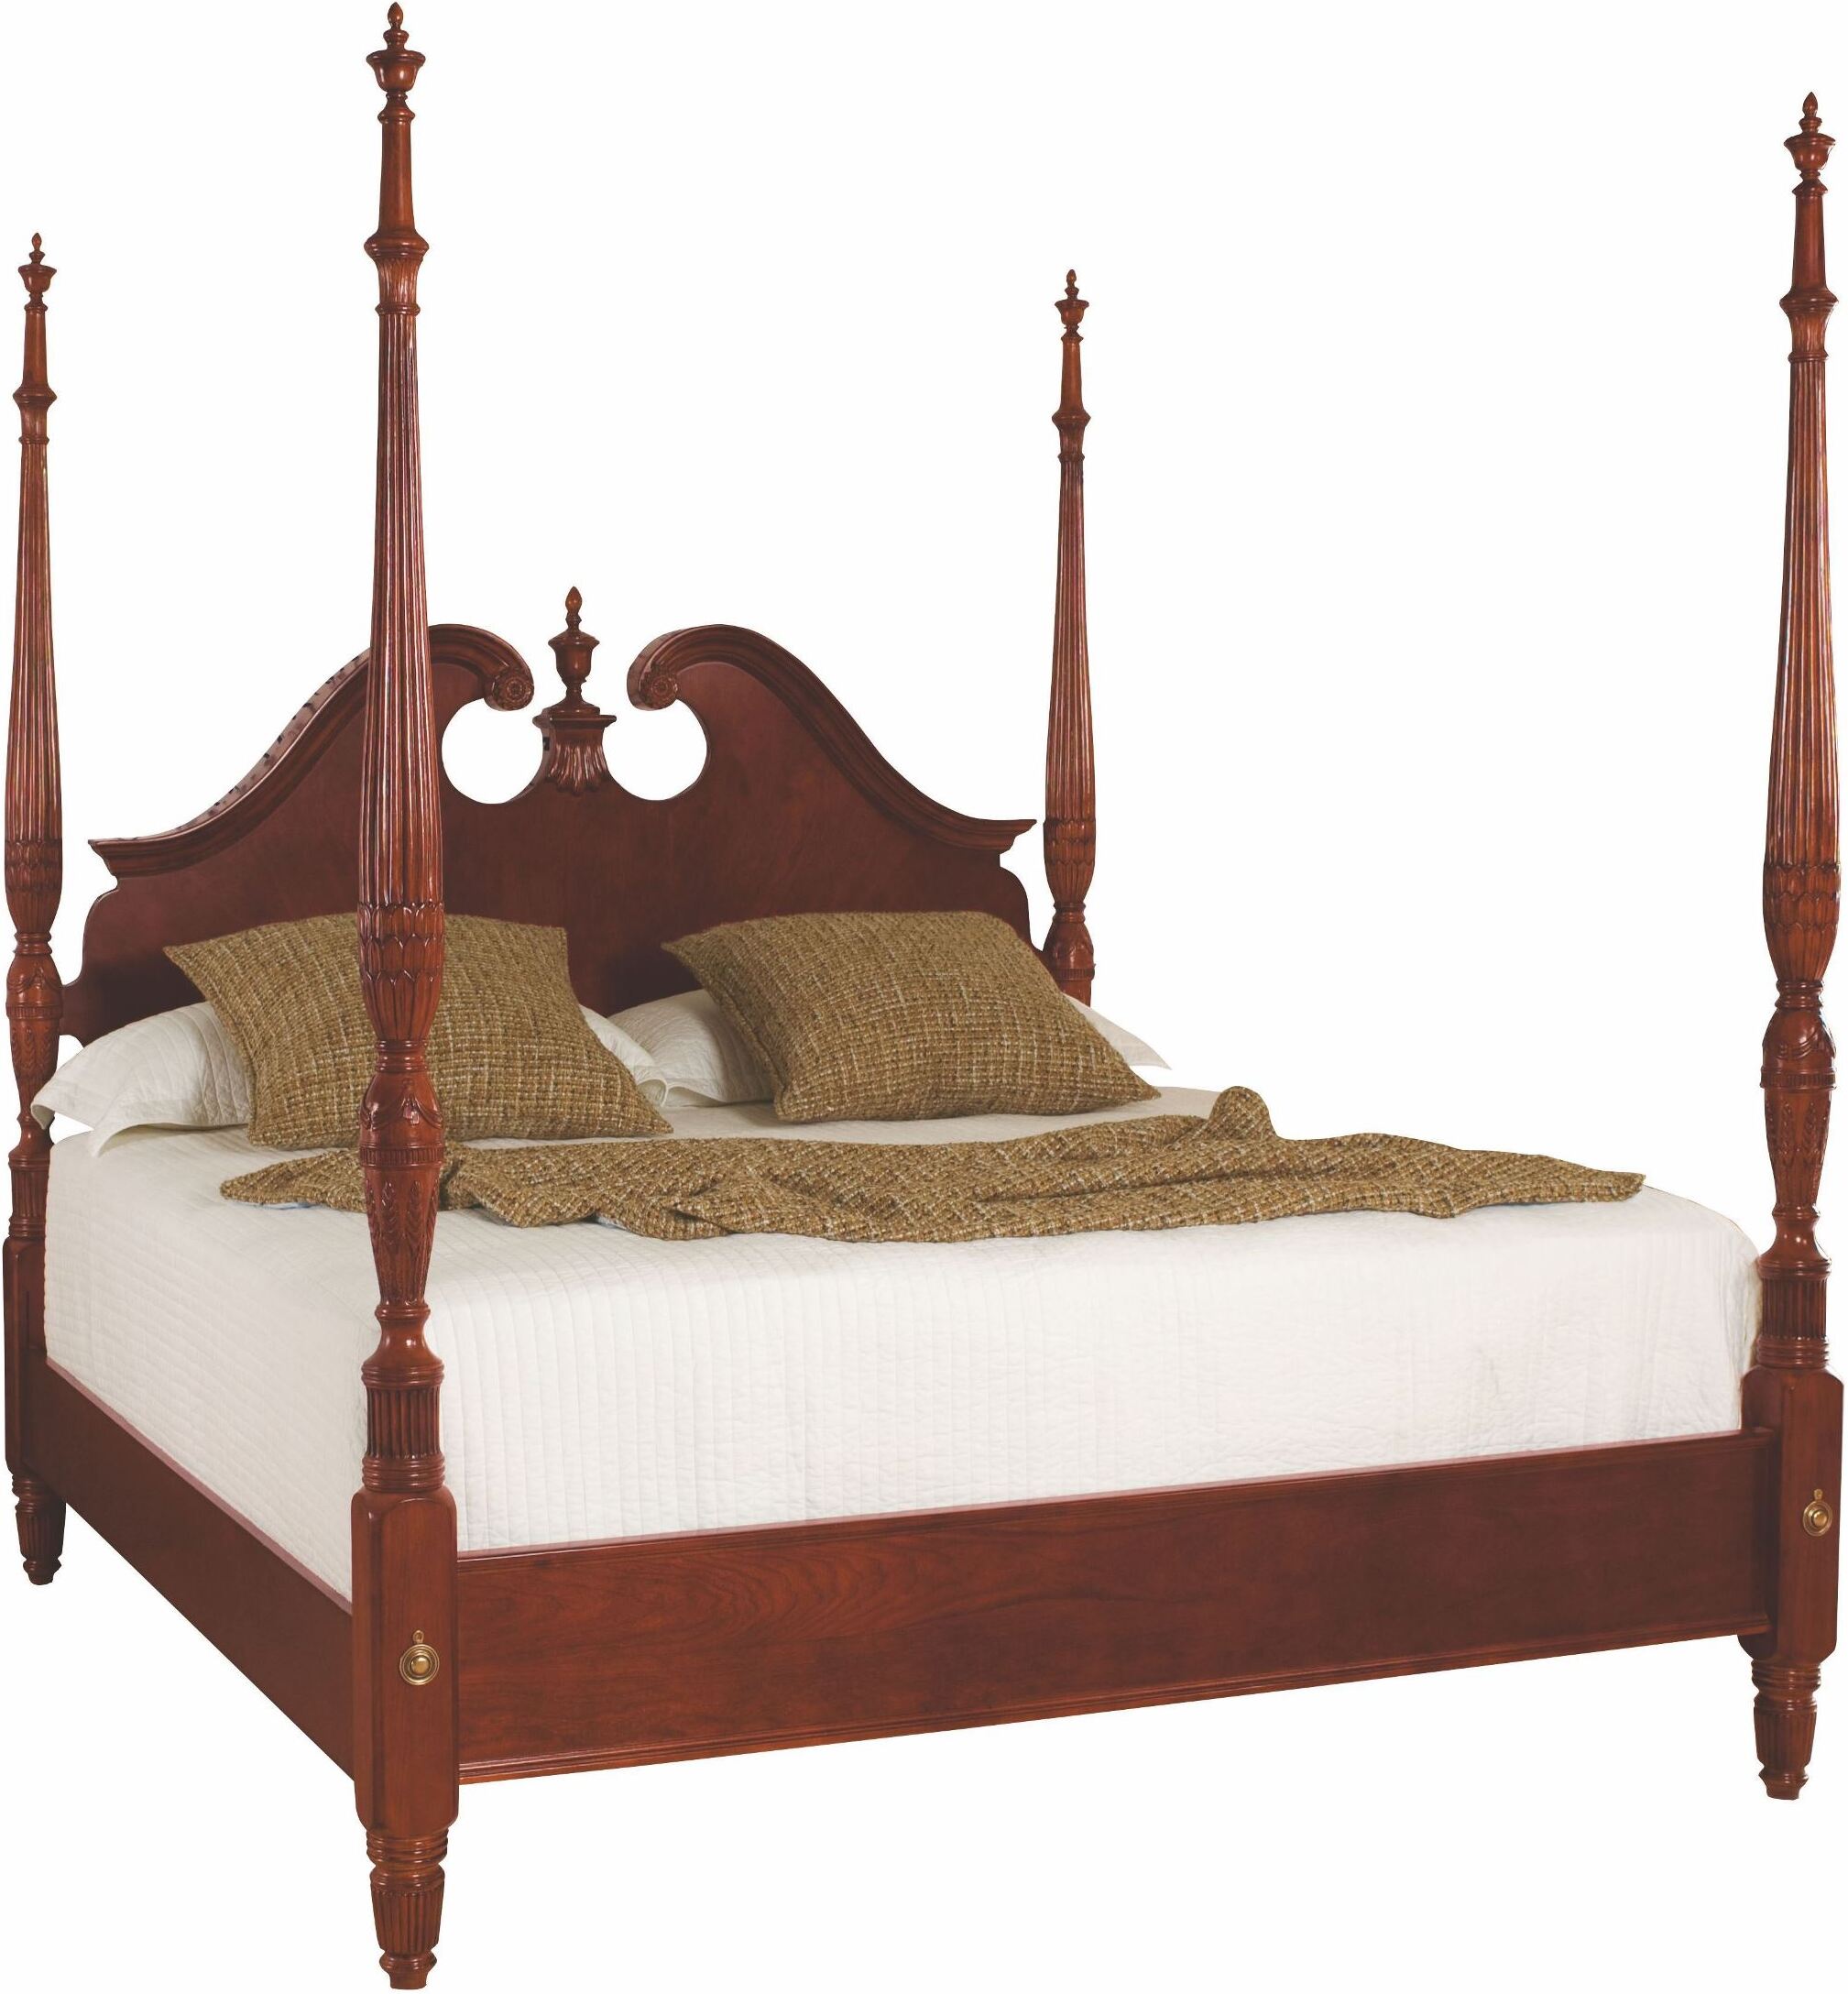 Cherry Grove Classic Antique, 4 Poster King Bed Set